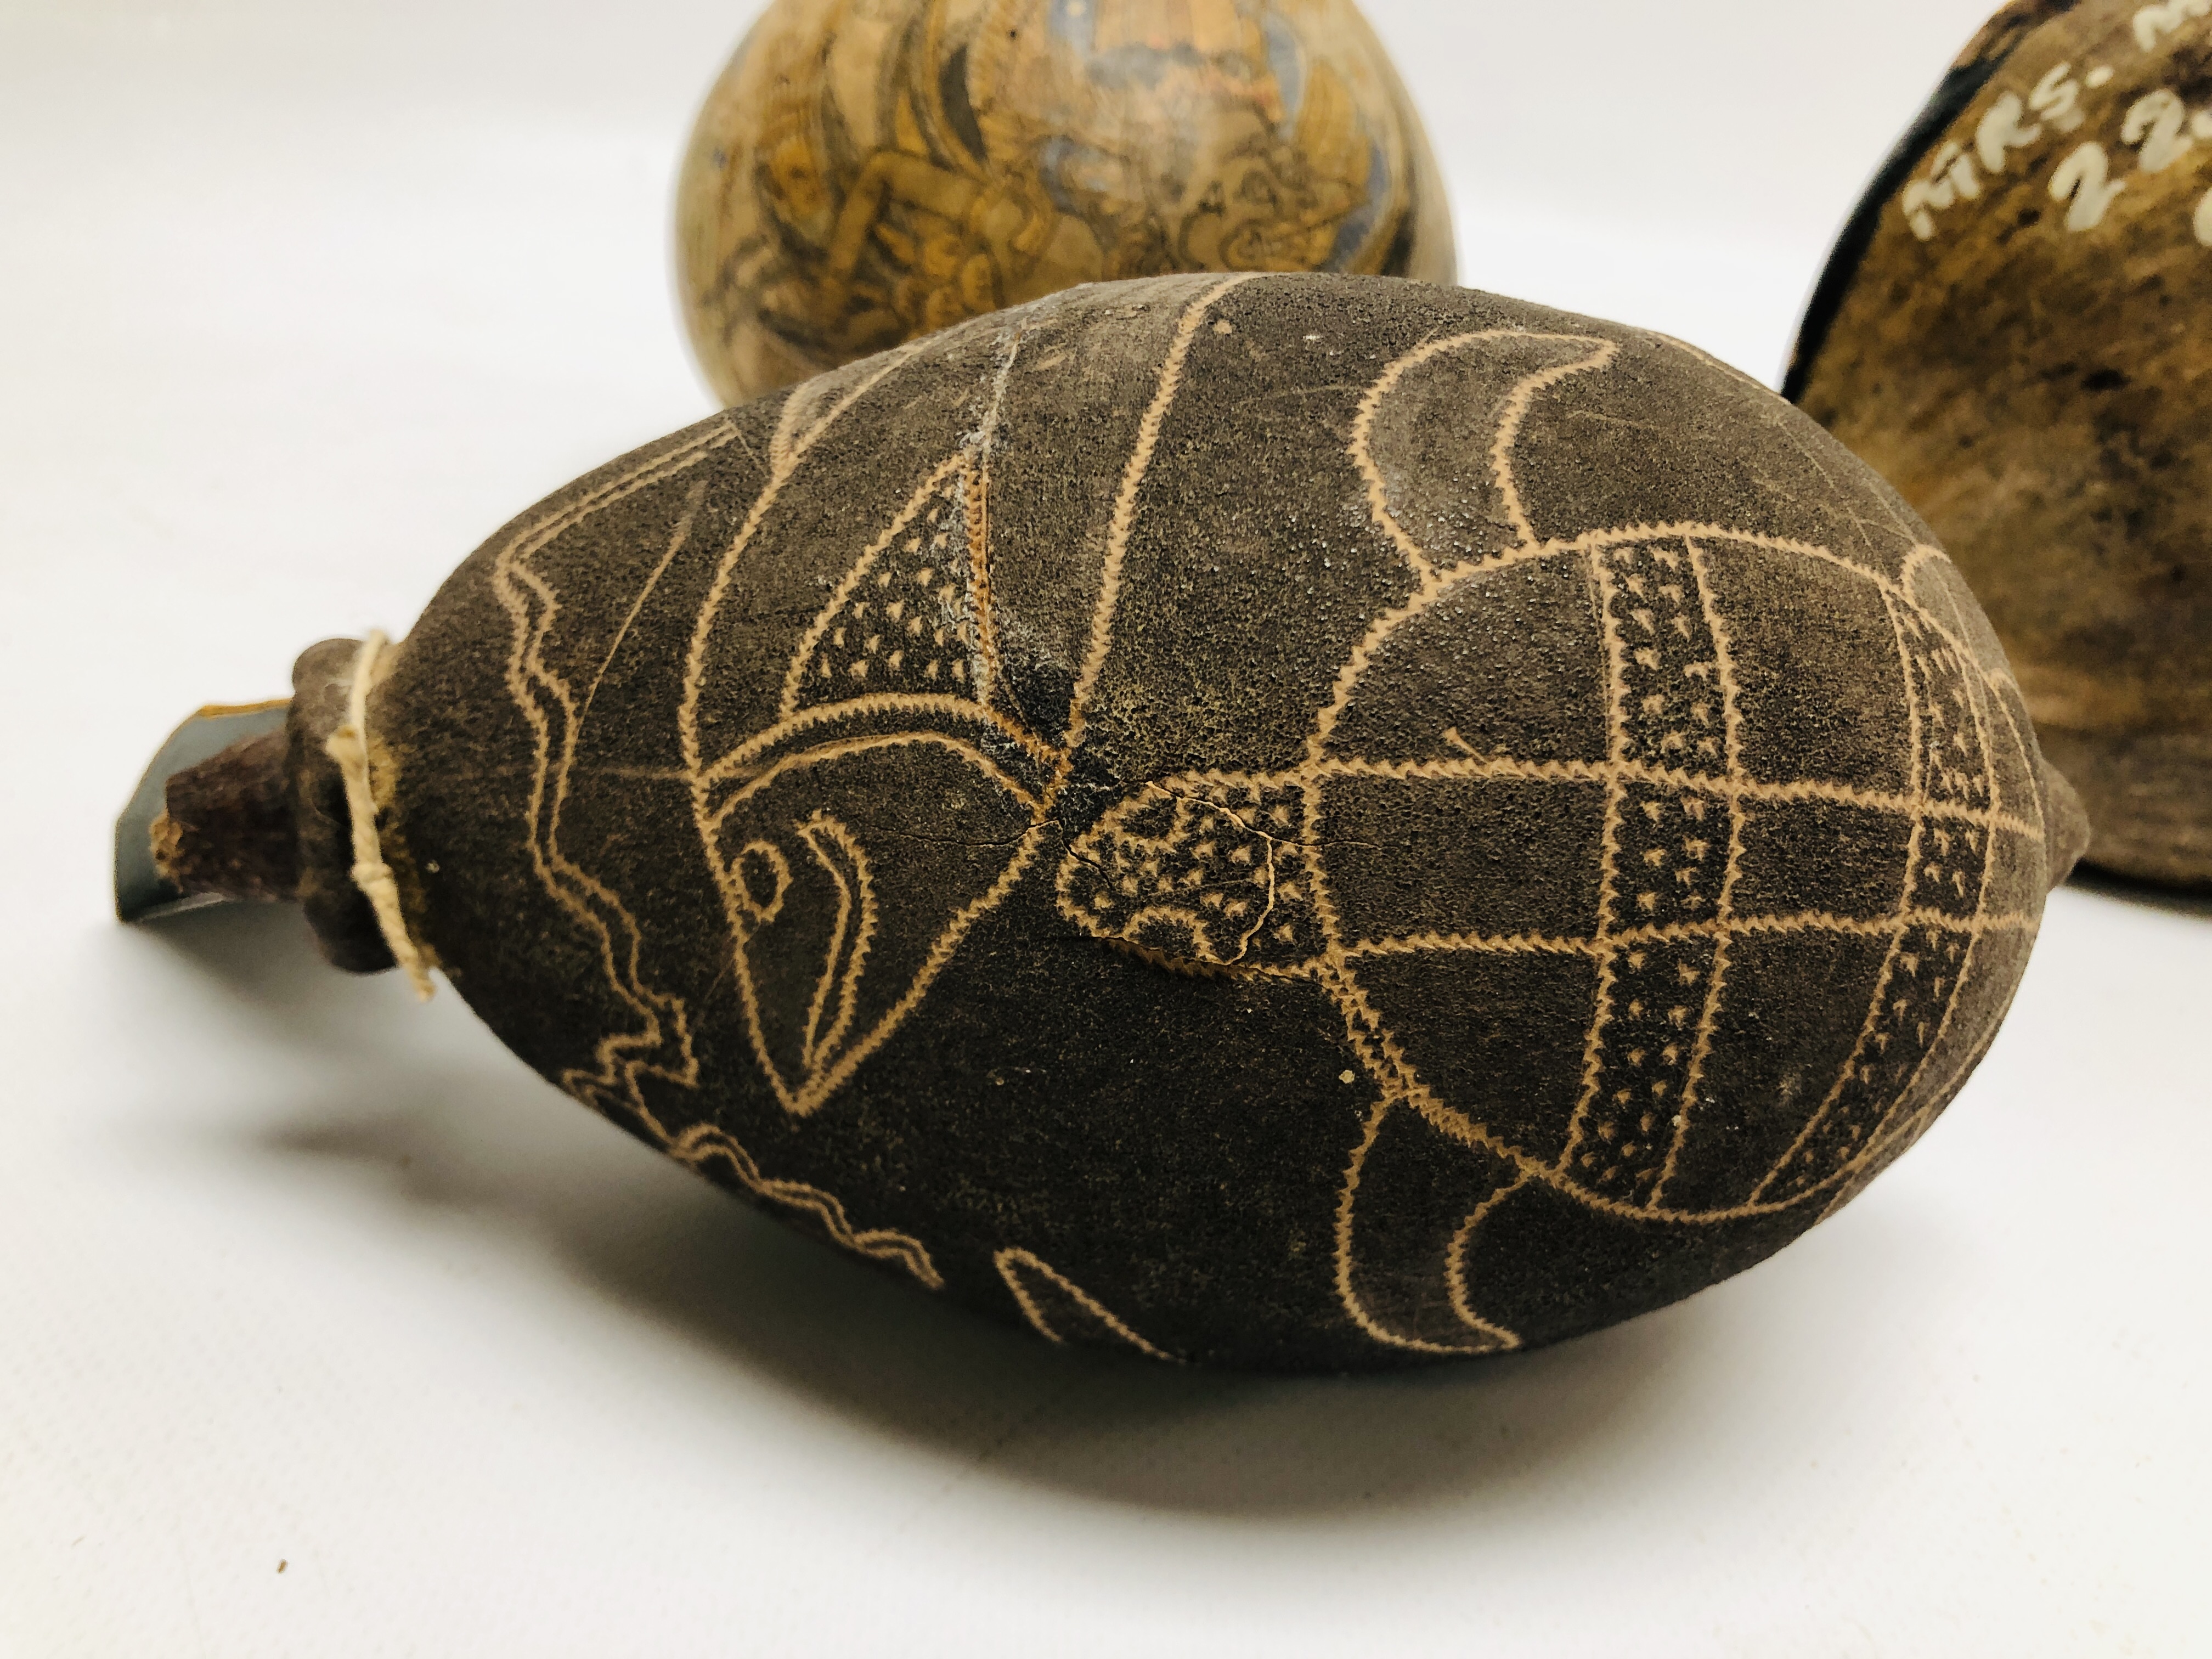 A NUT CARVED BY ABORIGINES DEPICTING SEA CREATURES A/F ALONG WITH A VESSEL MADE USING A NUT - Image 8 of 9